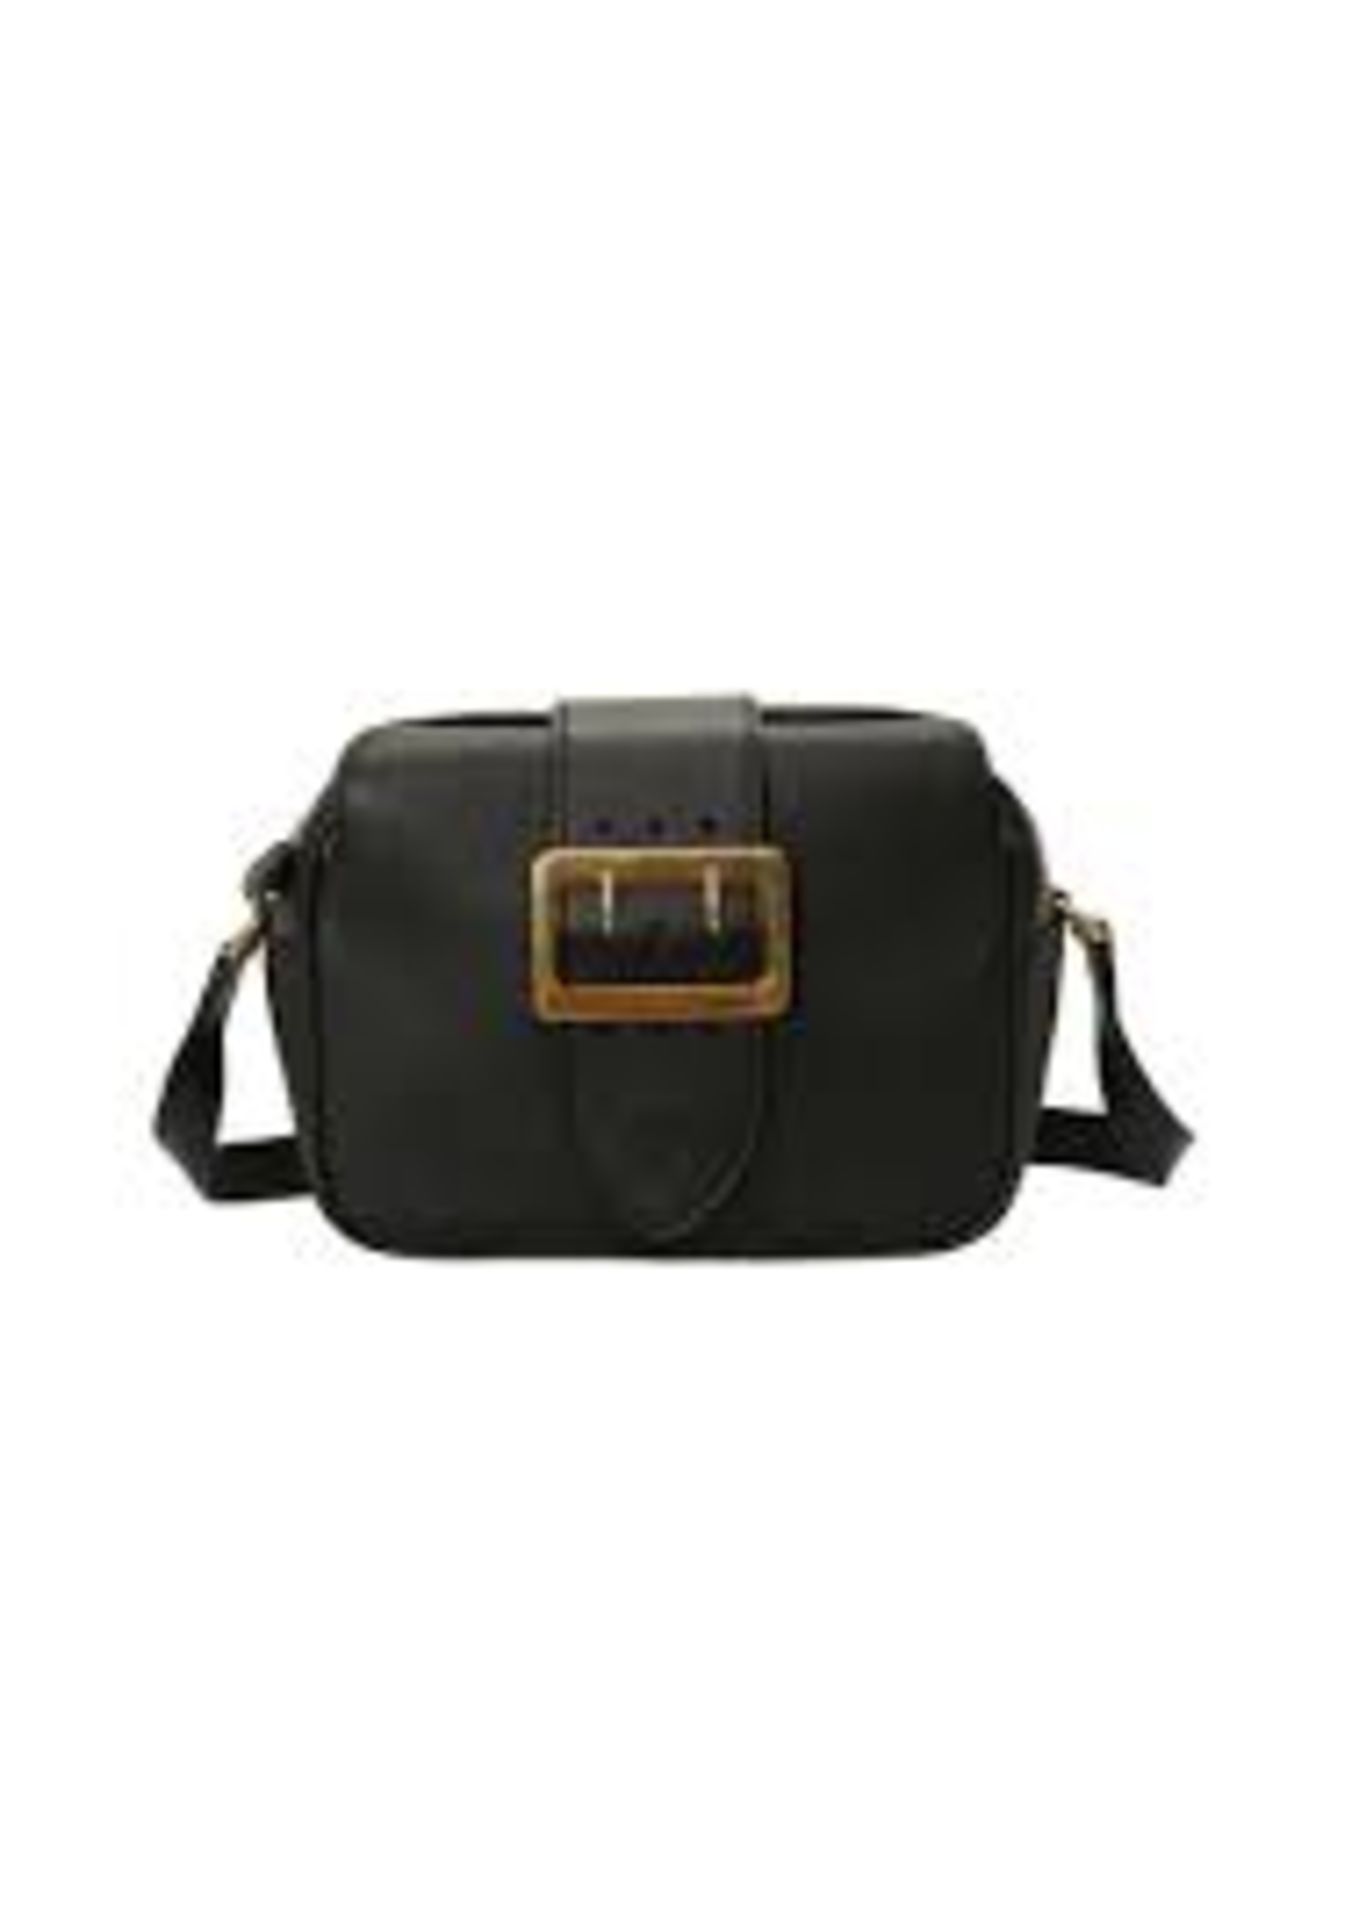 Burberry The Small Leather Buckle Bag in Black 20x18cm. (10.21) - Image 2 of 11